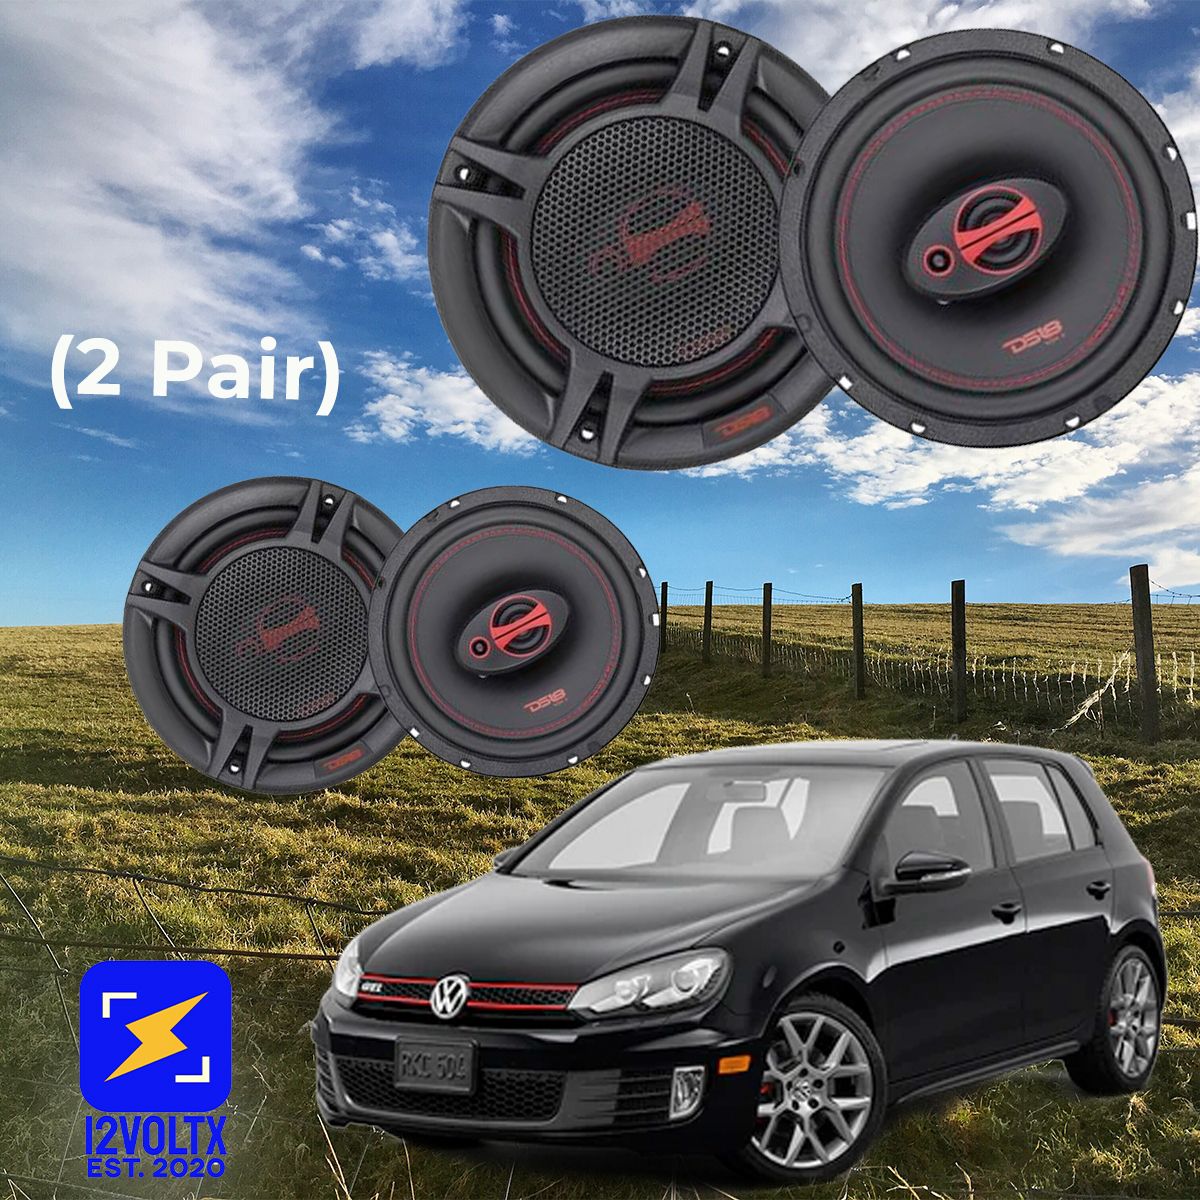 CAR AUDIO REPLACEMENT SPEAKERS FRONT AND REAR FOR 2006-2014 VW GTI